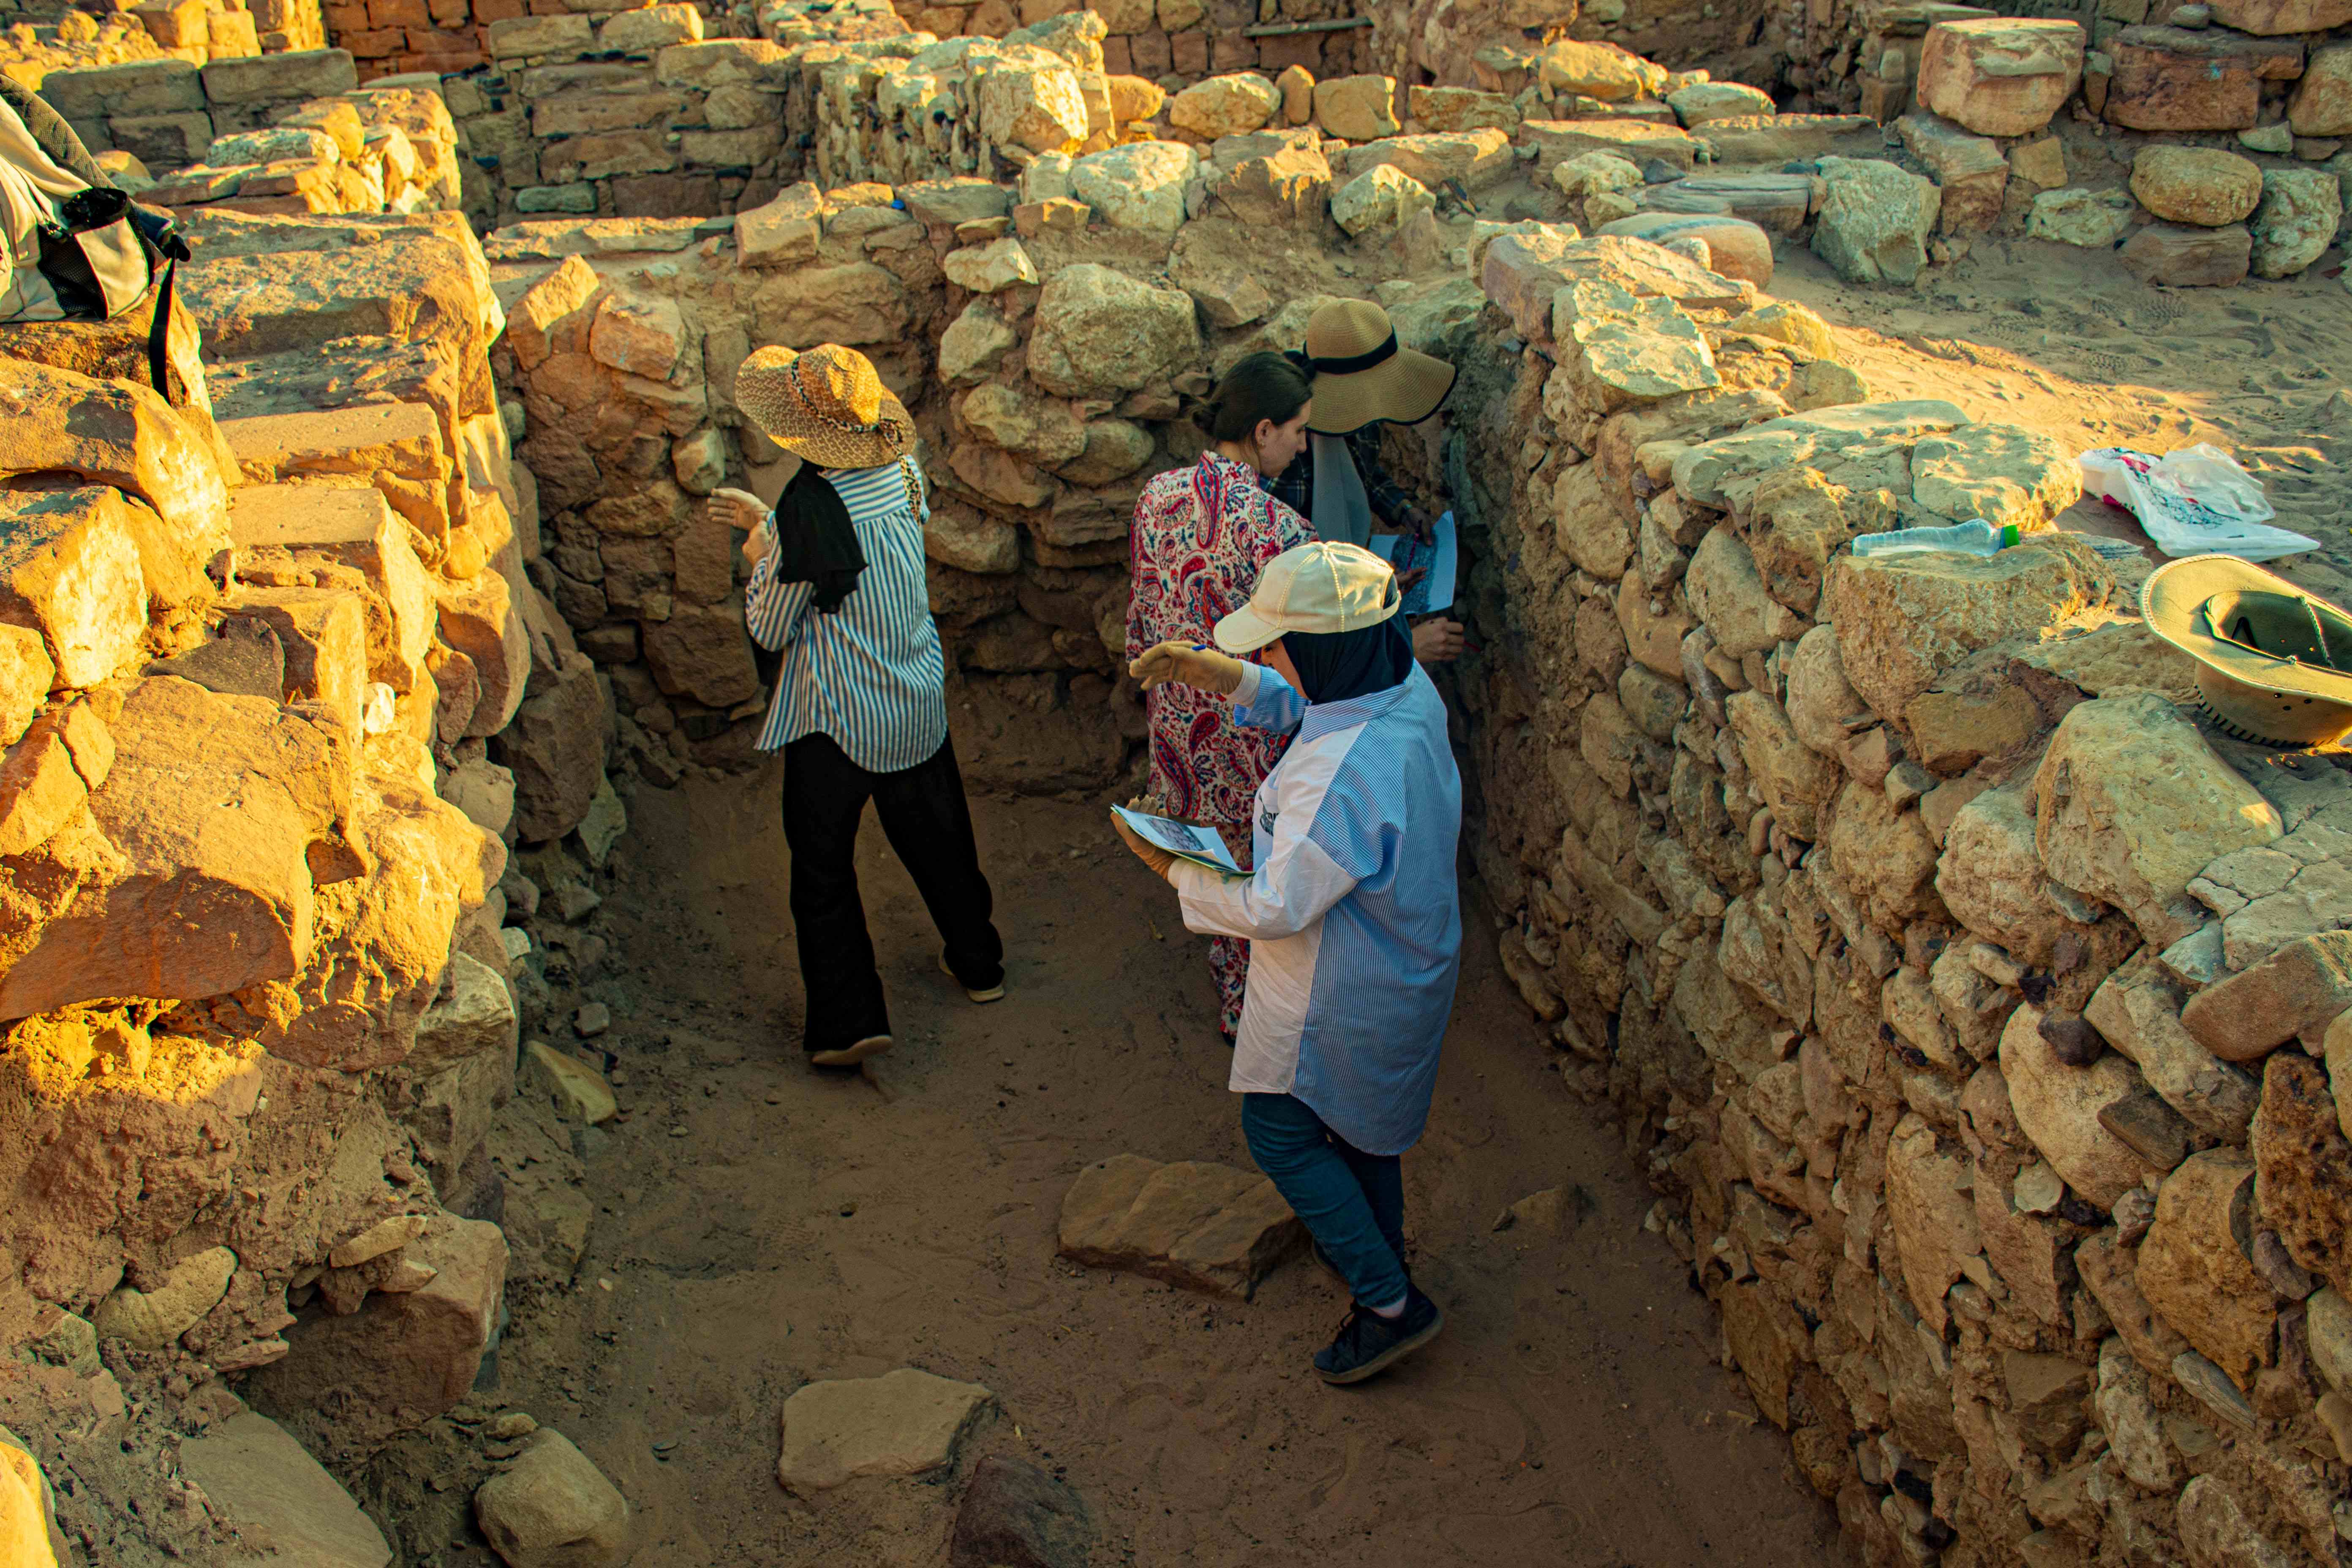 Jordanian Archeology as a Sustainable Industry (JASI)